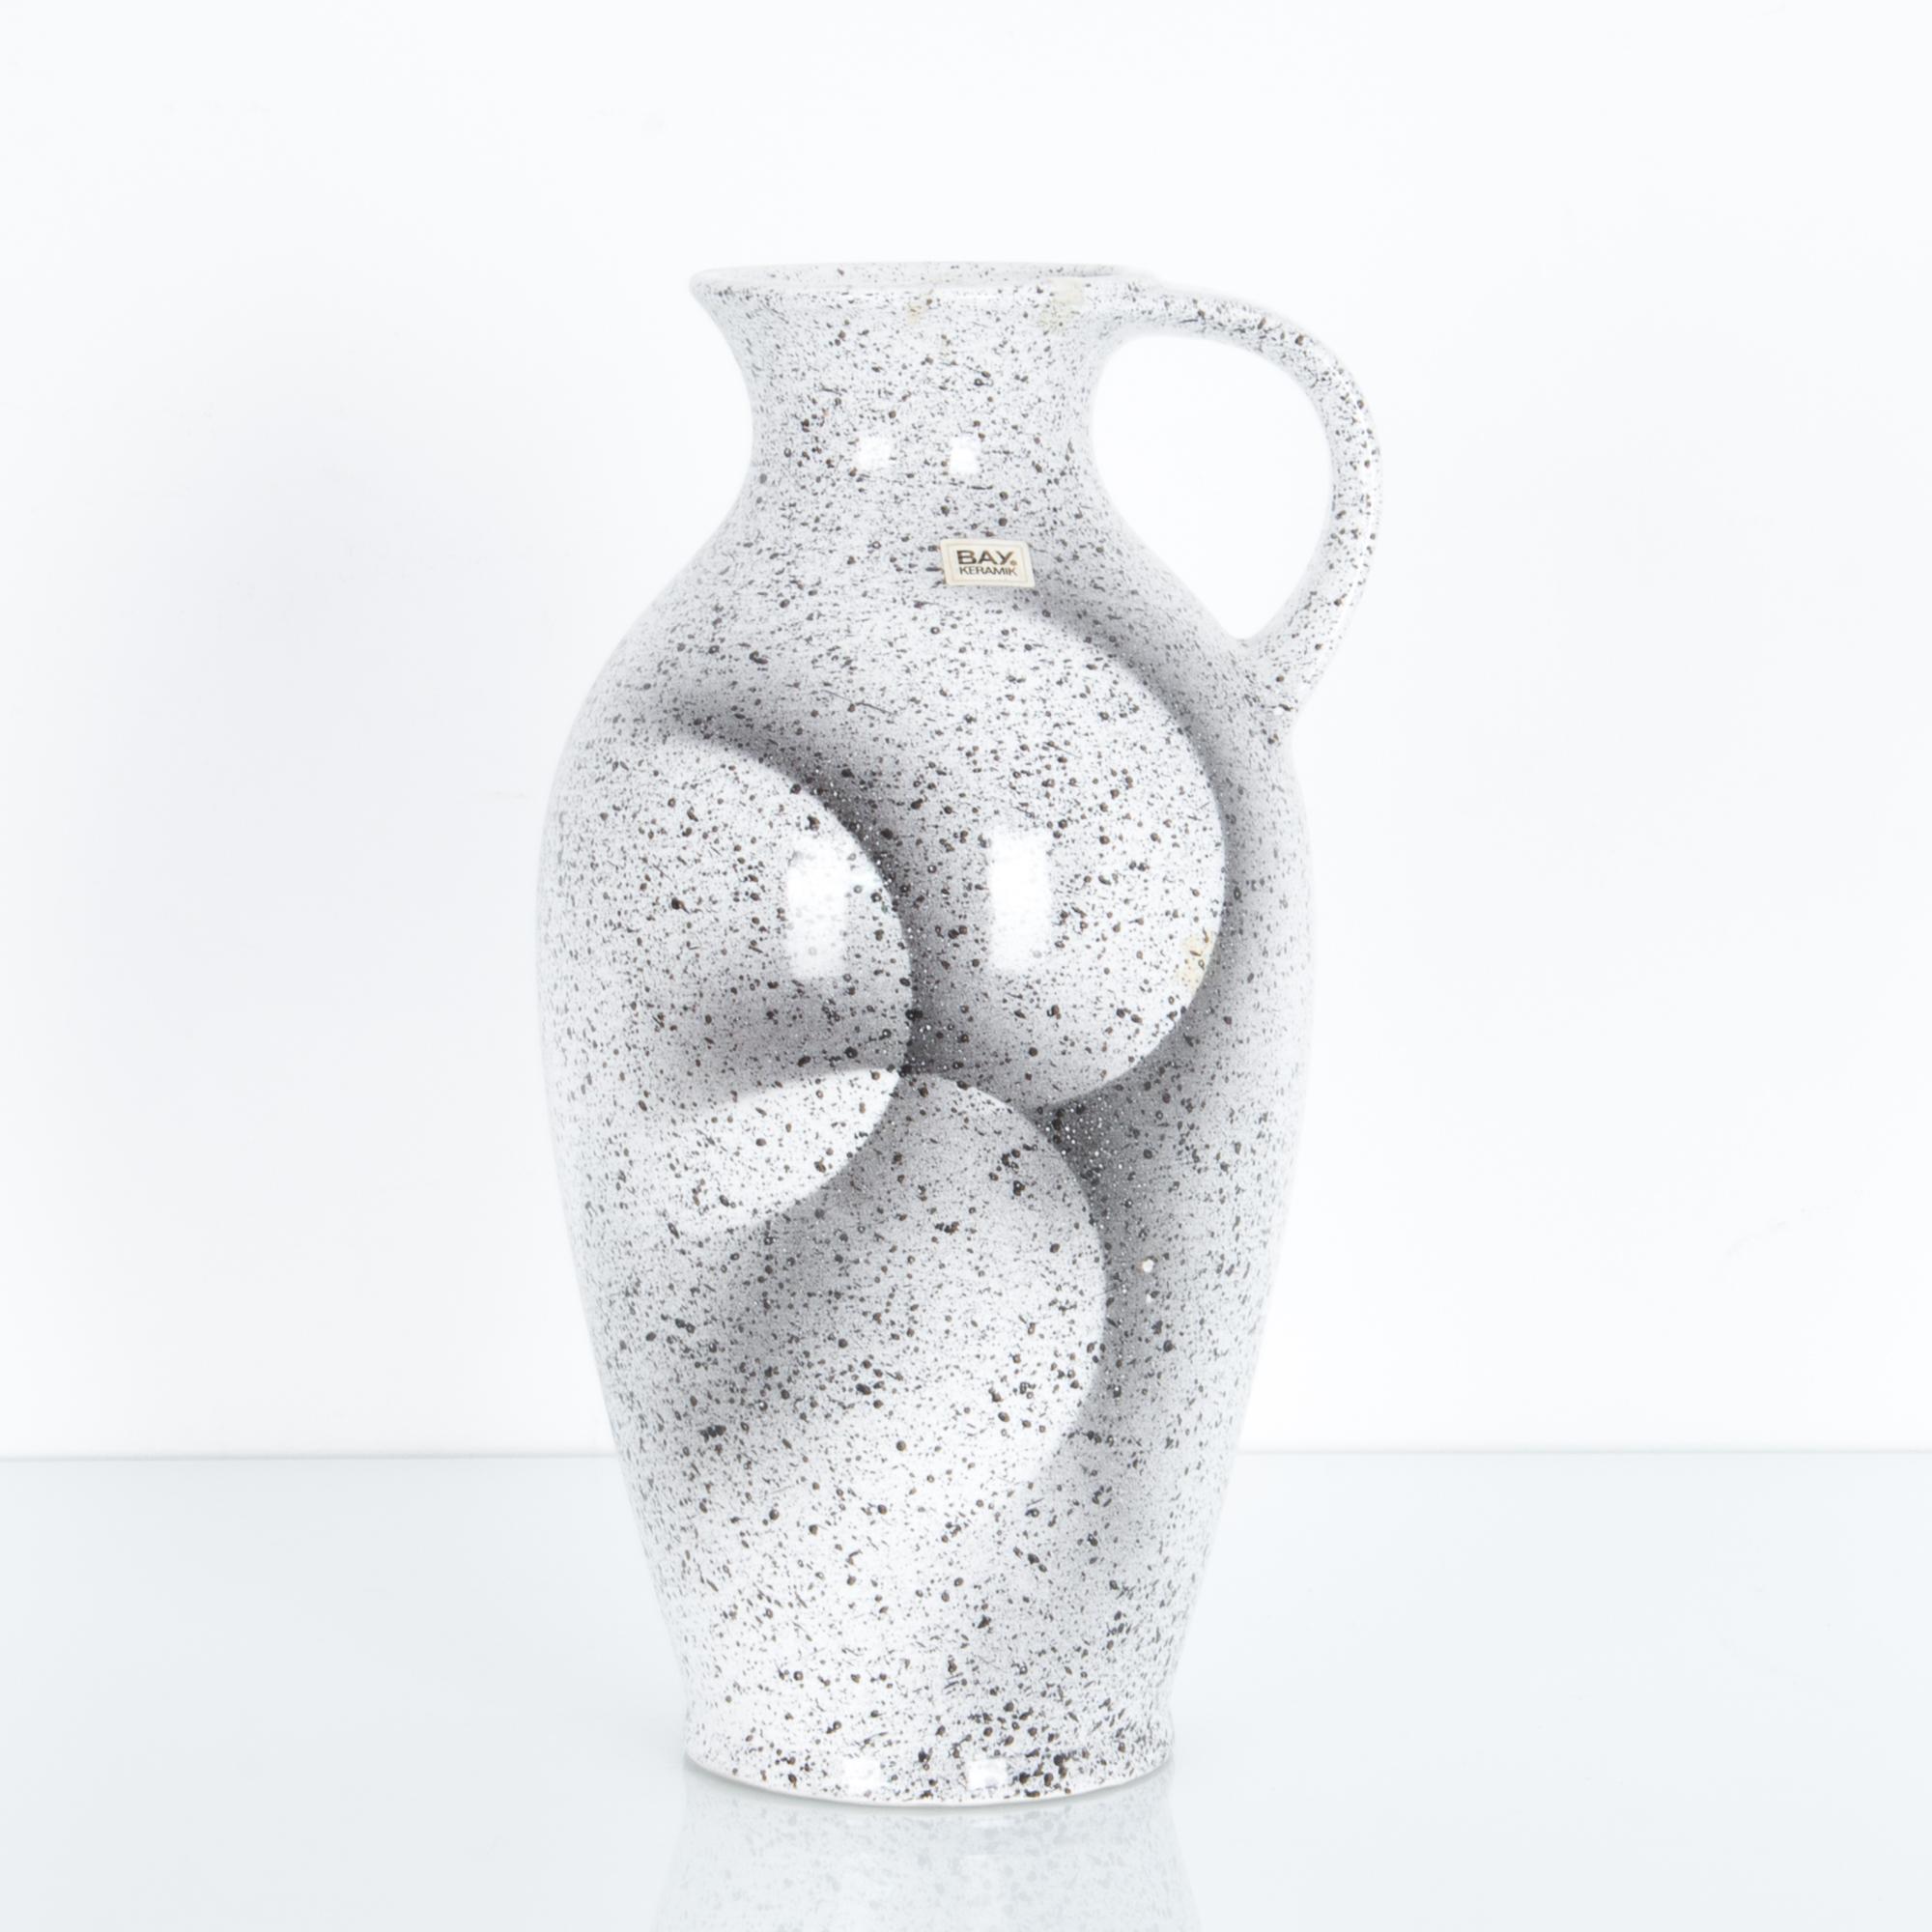 A textured vase pitcher from Germany circa 1960, features a distinctive shadowy glaze, a geometric motif in atmospheric speckled white. These characteristic mid-20th century ceramics were produced in West Germany, featuring “W. Germany